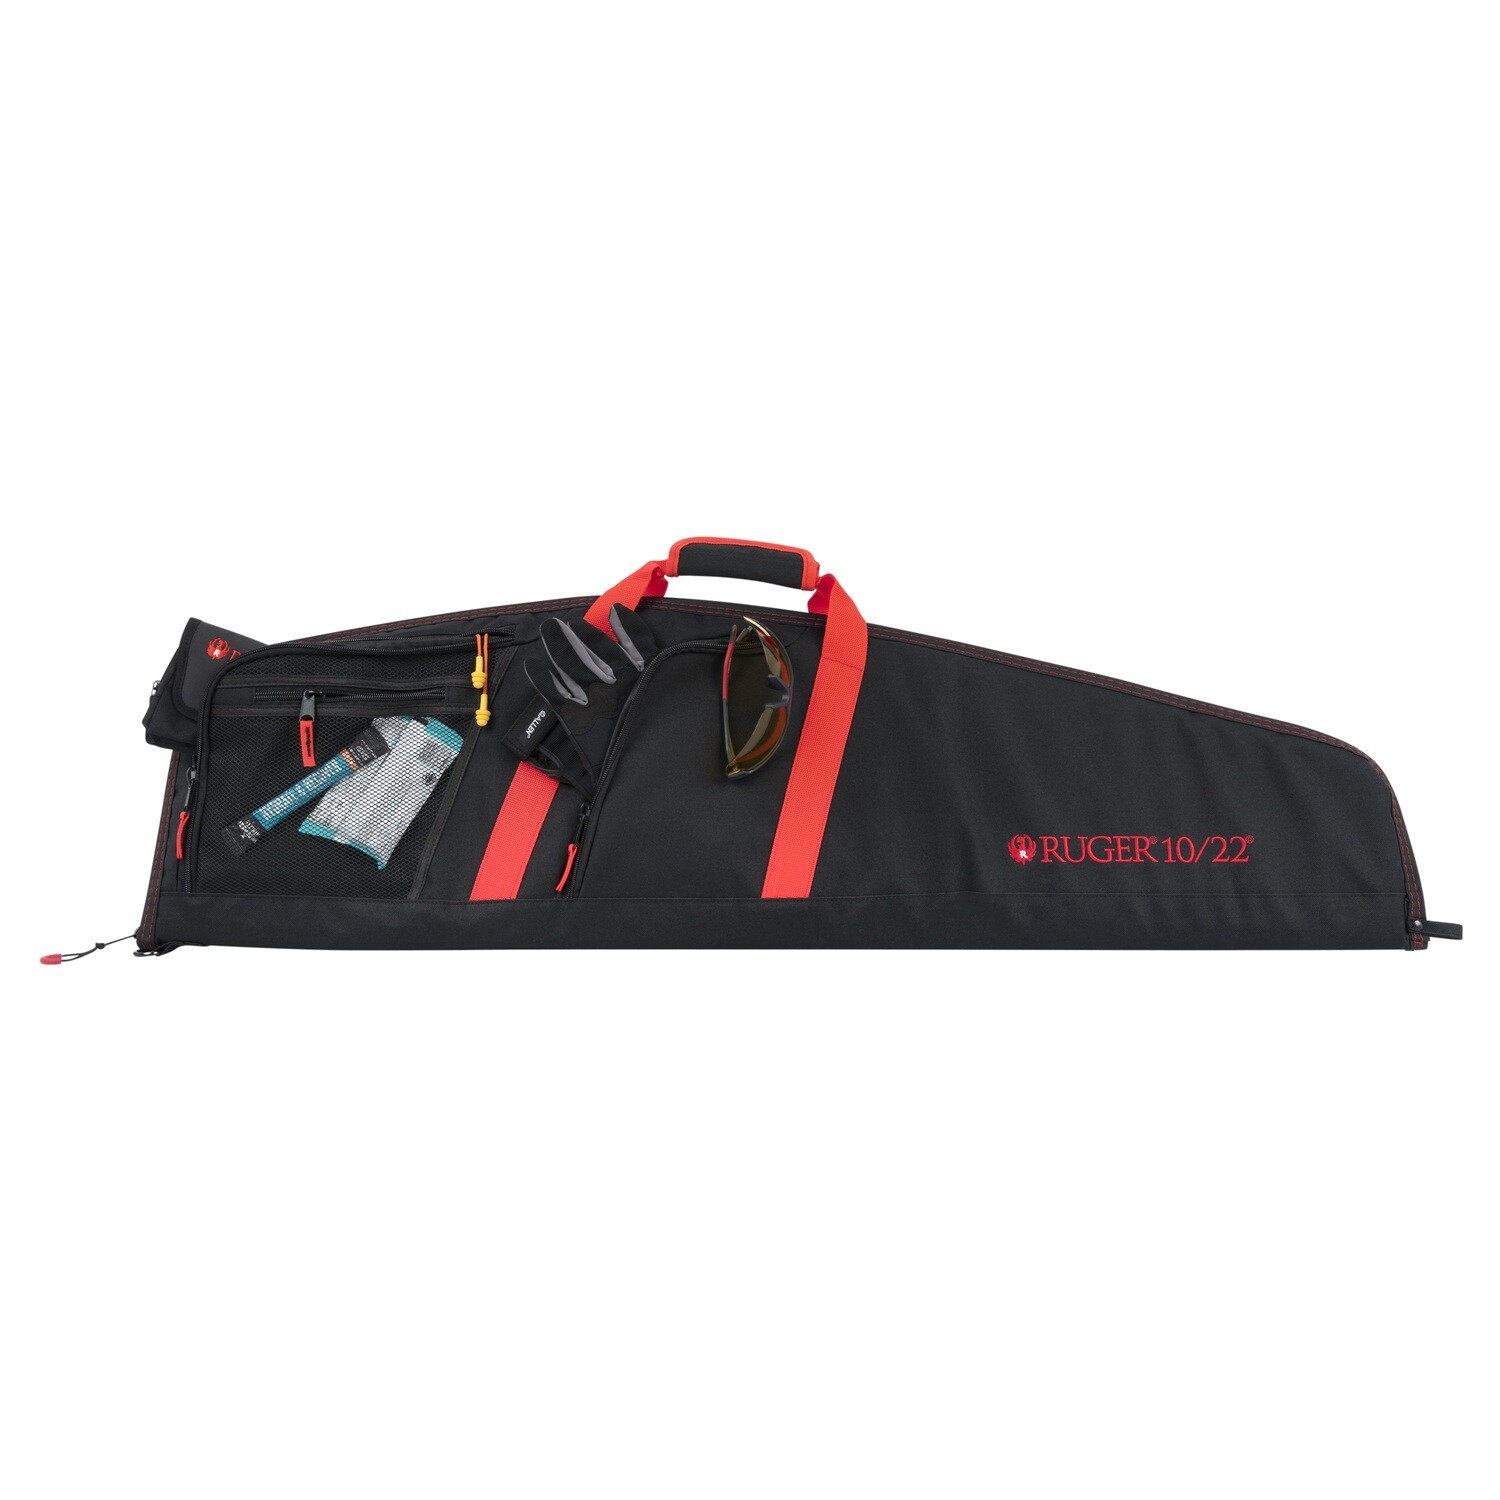 Ruger 10/22 40" Flagstaff Rifle Case, Black/Red